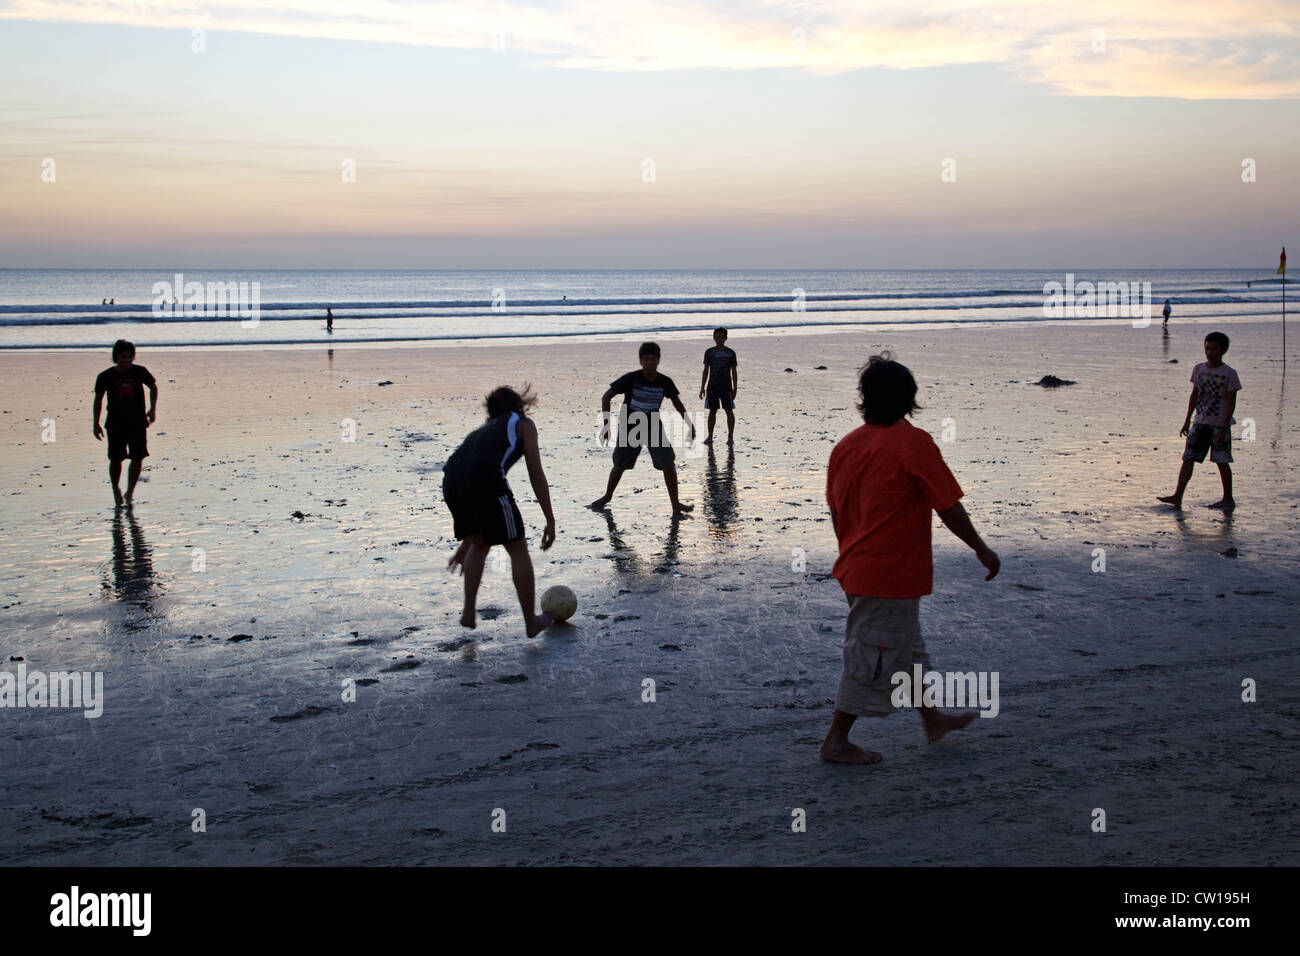 Young people play football at sunset on the beach in Kuta, Bali, Indonesia. Stock Photo